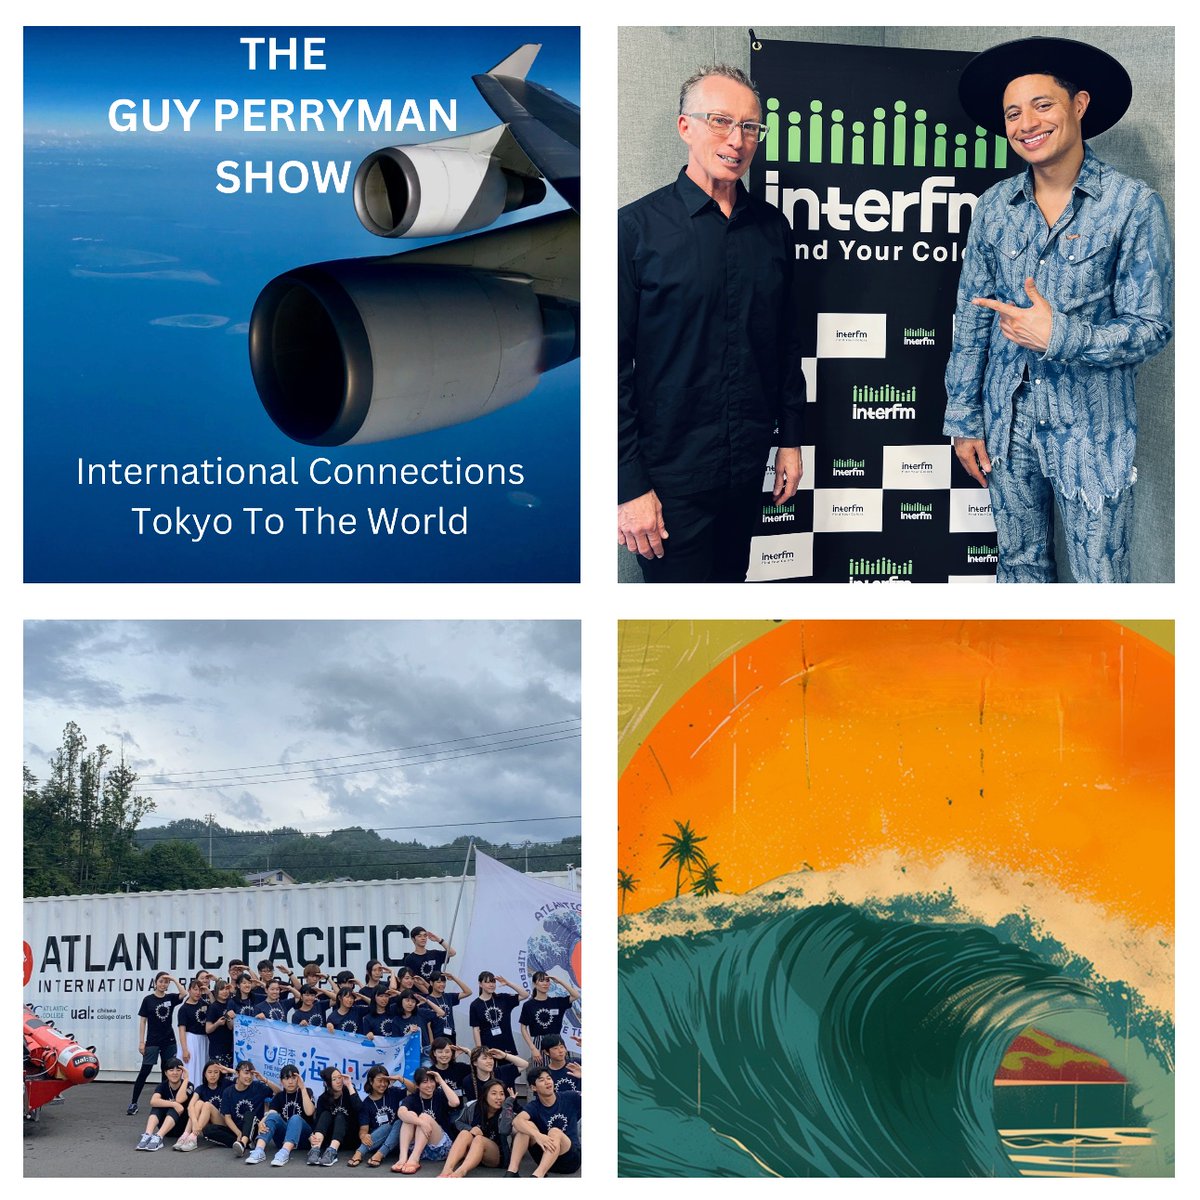 A day to wallow in beautiful ocean waters around the world and in beautiful soulful music inspired by 1978 with guest @josejamesmusic and more all with the music to match!! #guyperryman GPS @InterFM897 Fri 5/10 On air interfm.co.jp On demand mixcloud.com/GuyPerryman/